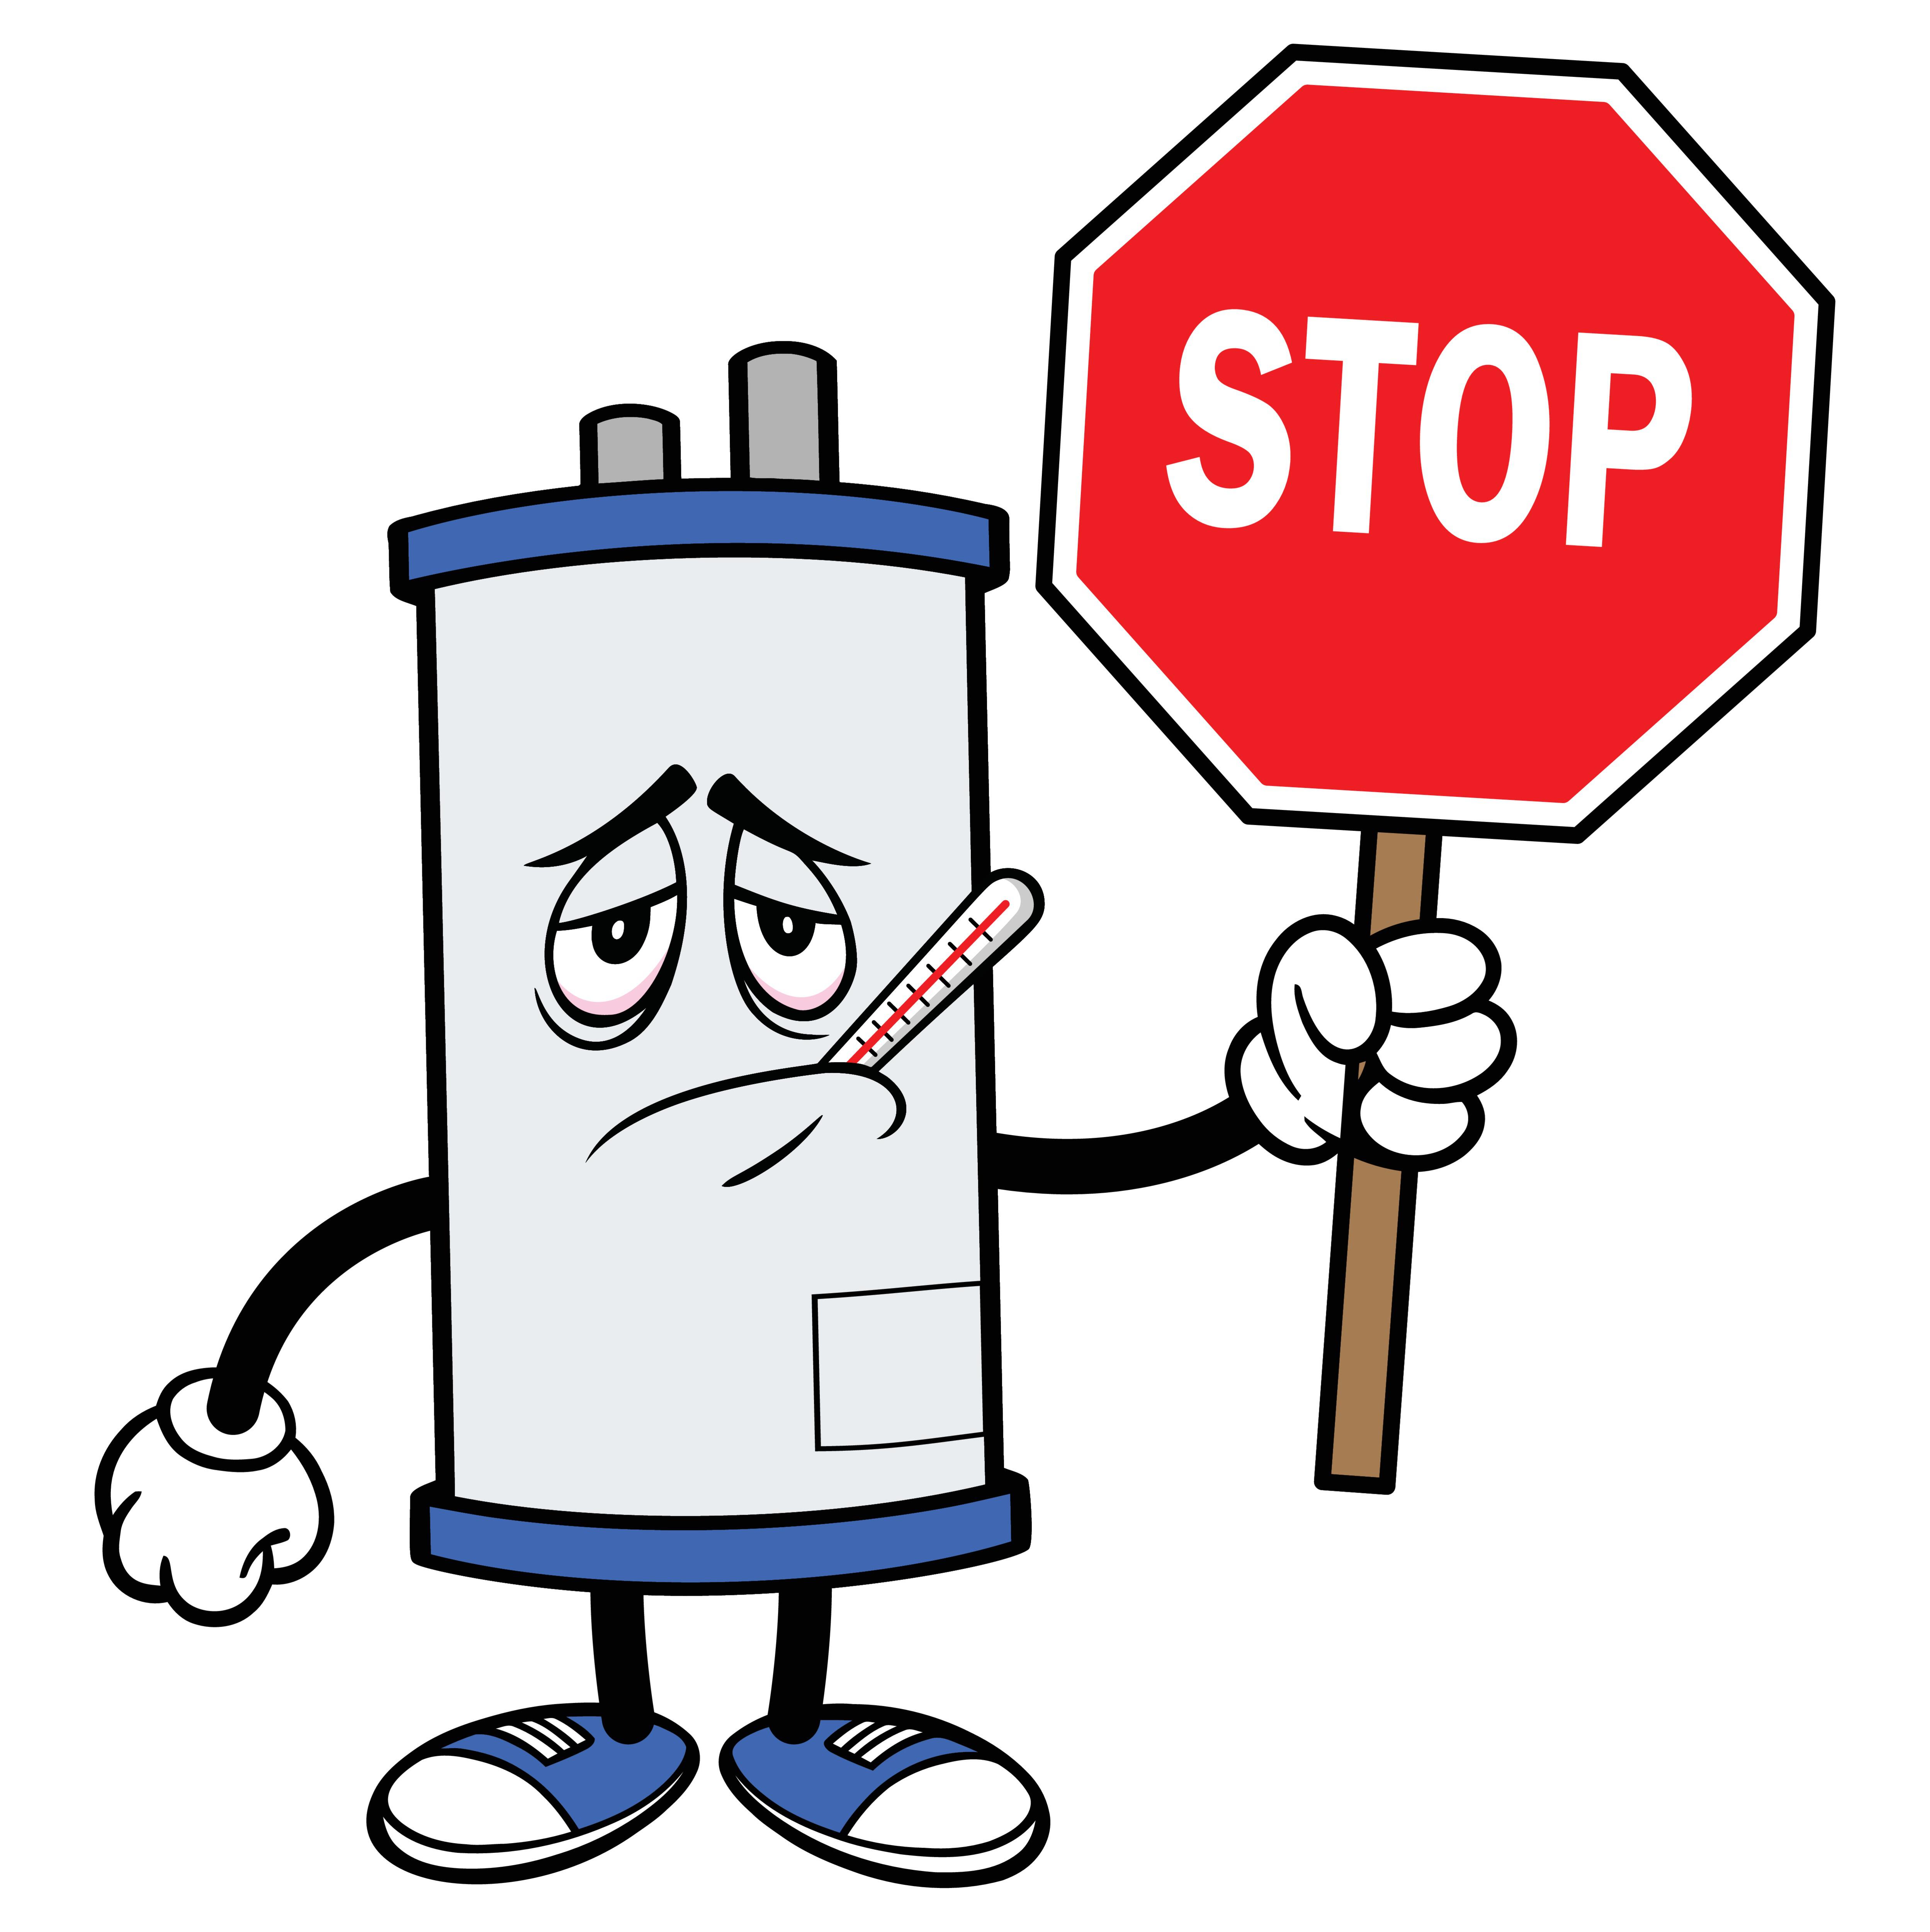 Water Heater Sick with Stop Sign - A cartoon illustration of a Sick Water Heater Mascot with a Stop Sign.